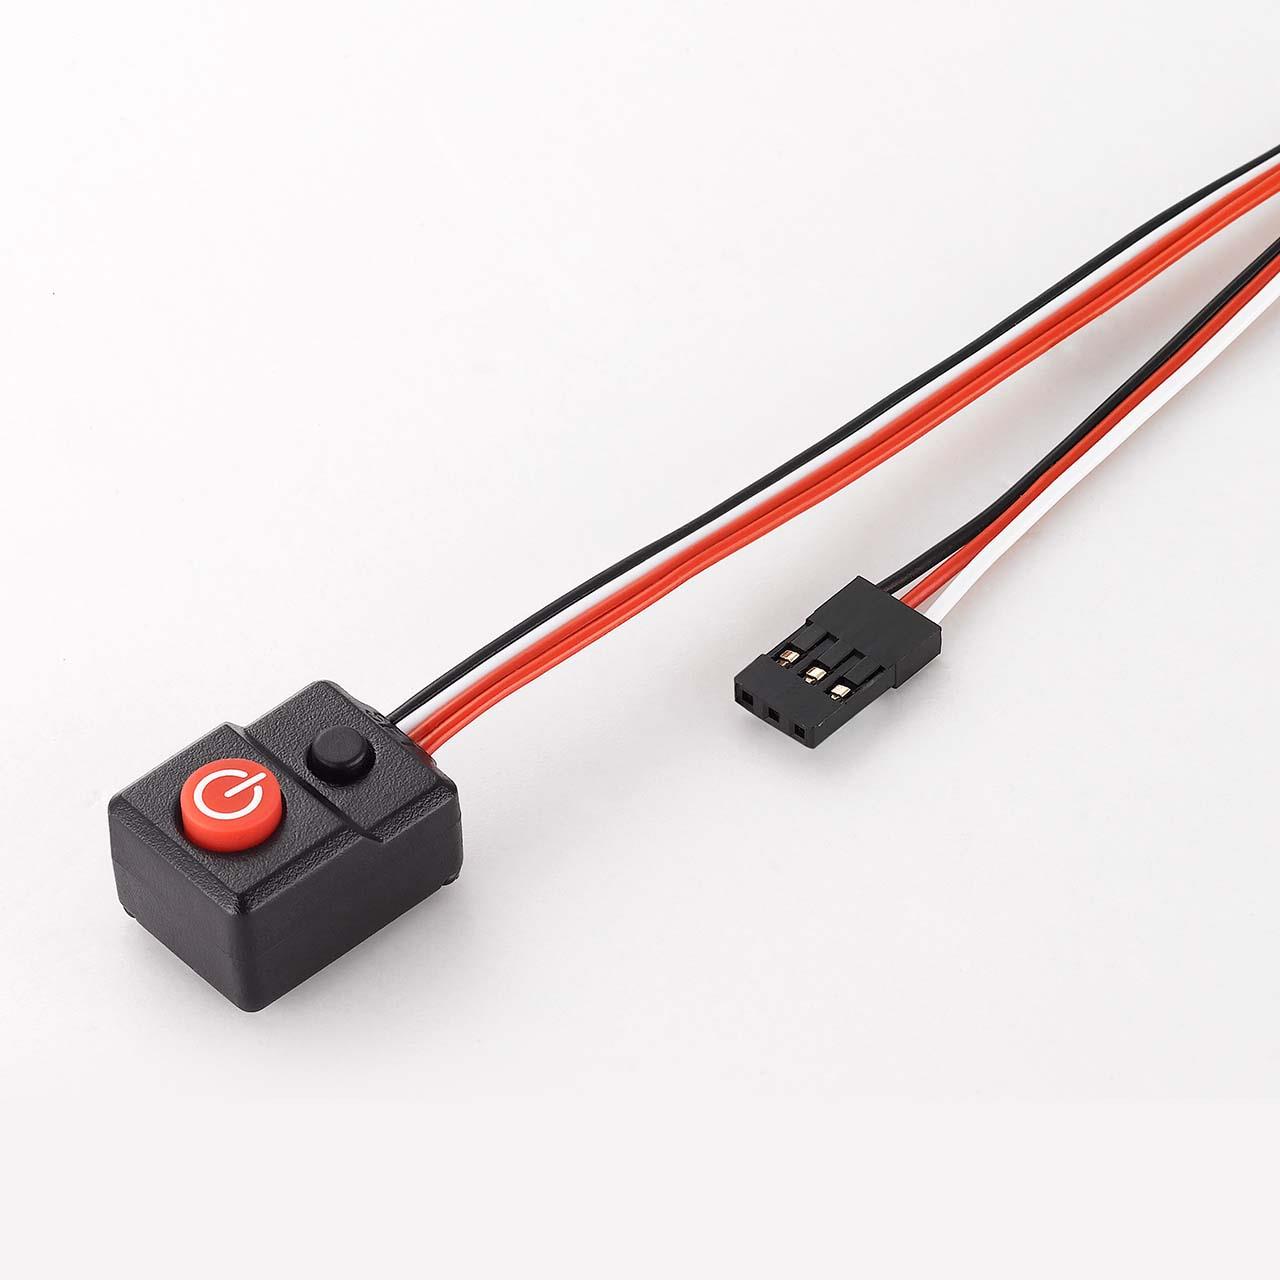 Hobbywing Switch for XR8-SCT MAX10-SCT, MAX10, Crawler Brushed